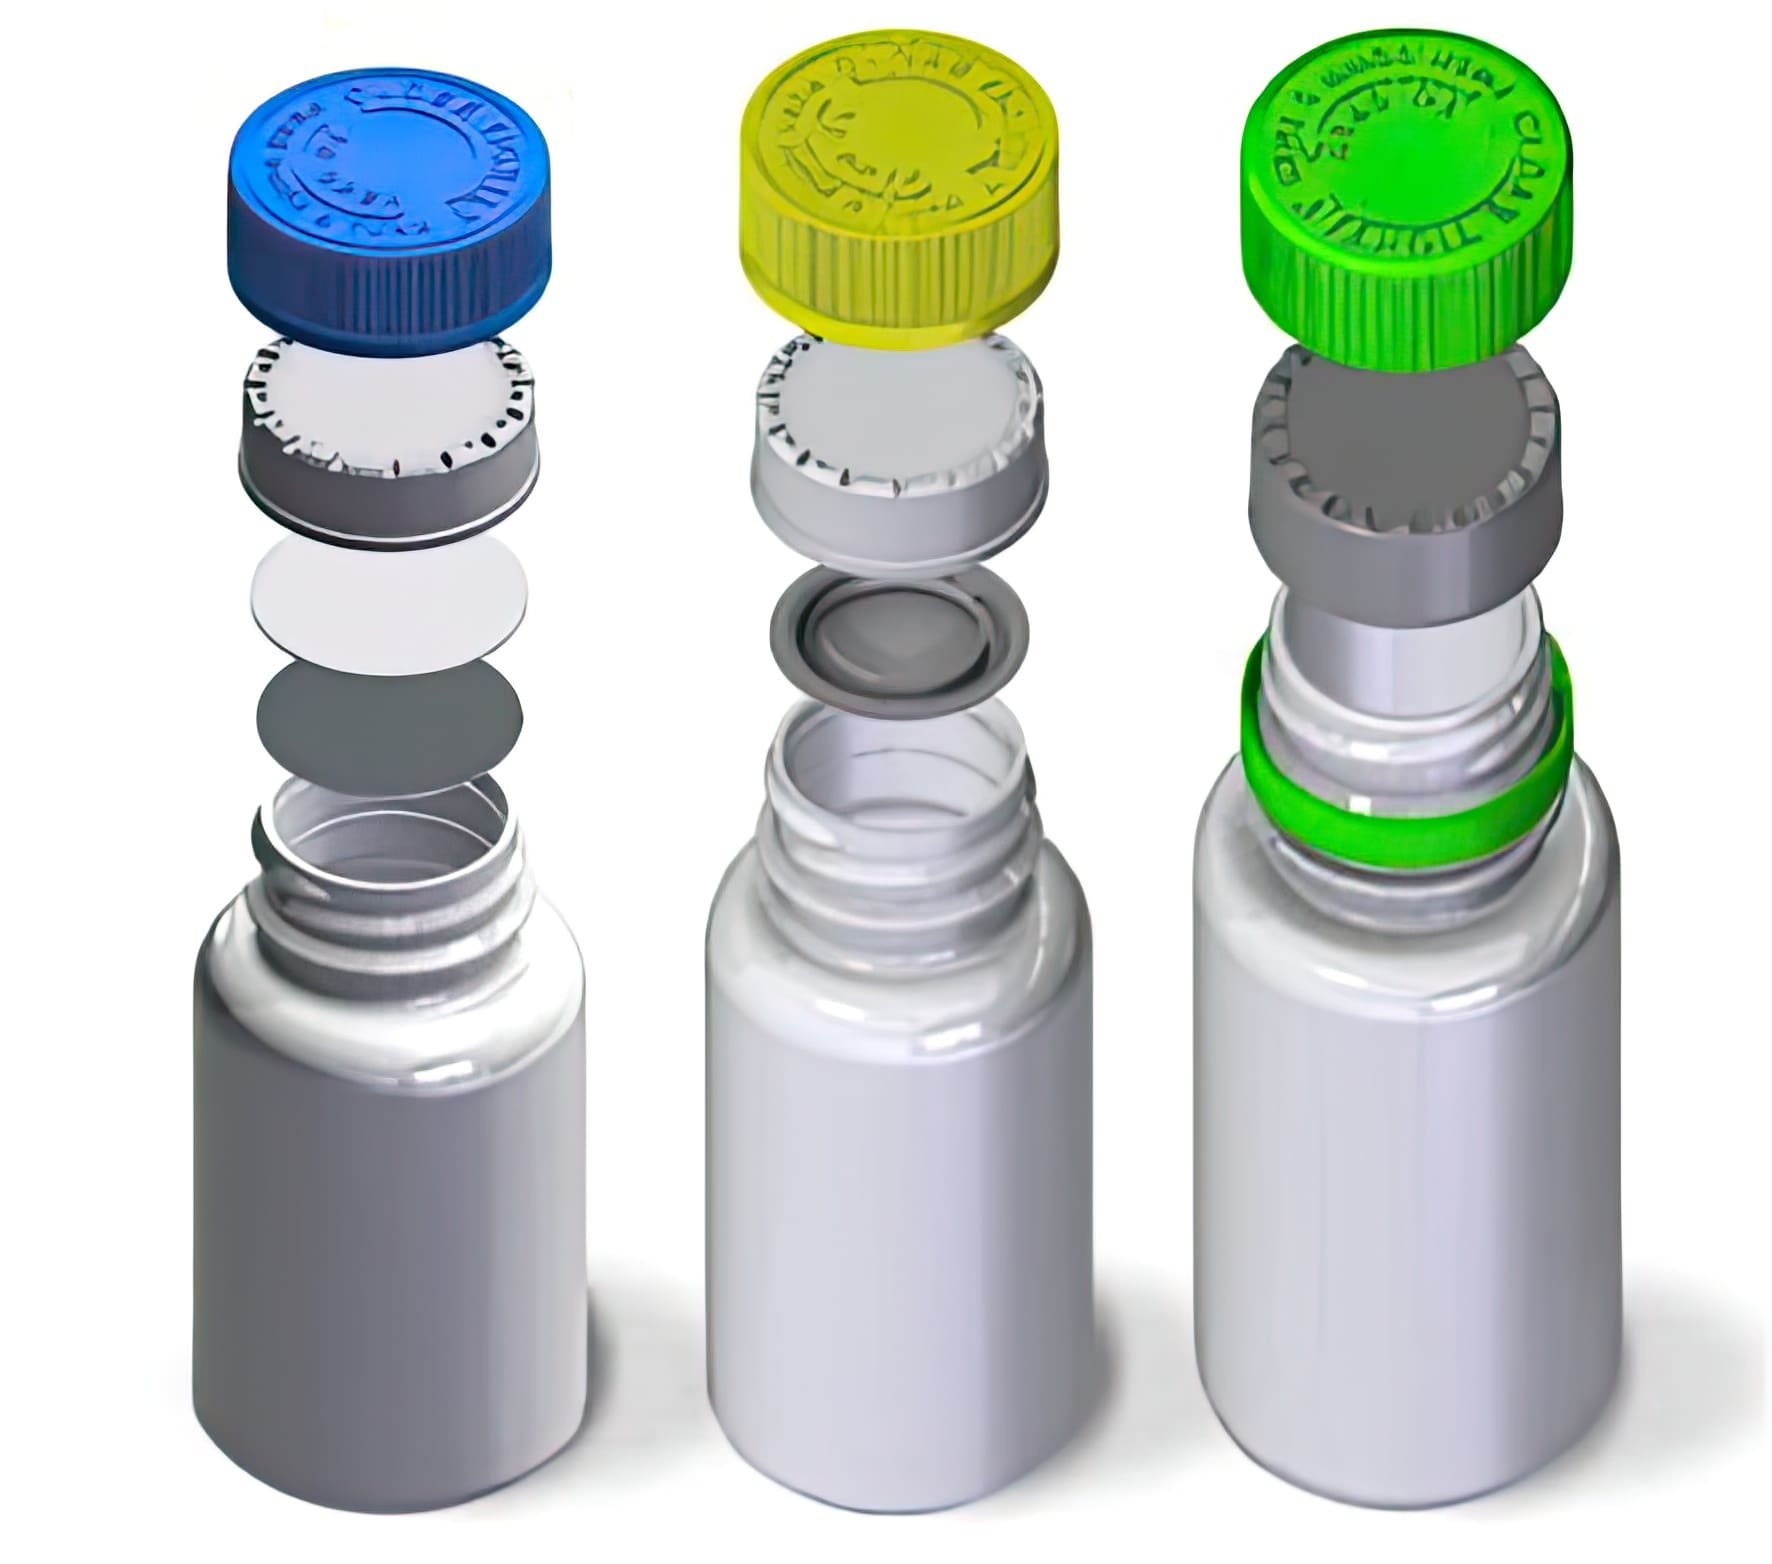 Sample Pack - Child Resistant Pop Top Bottles & Container